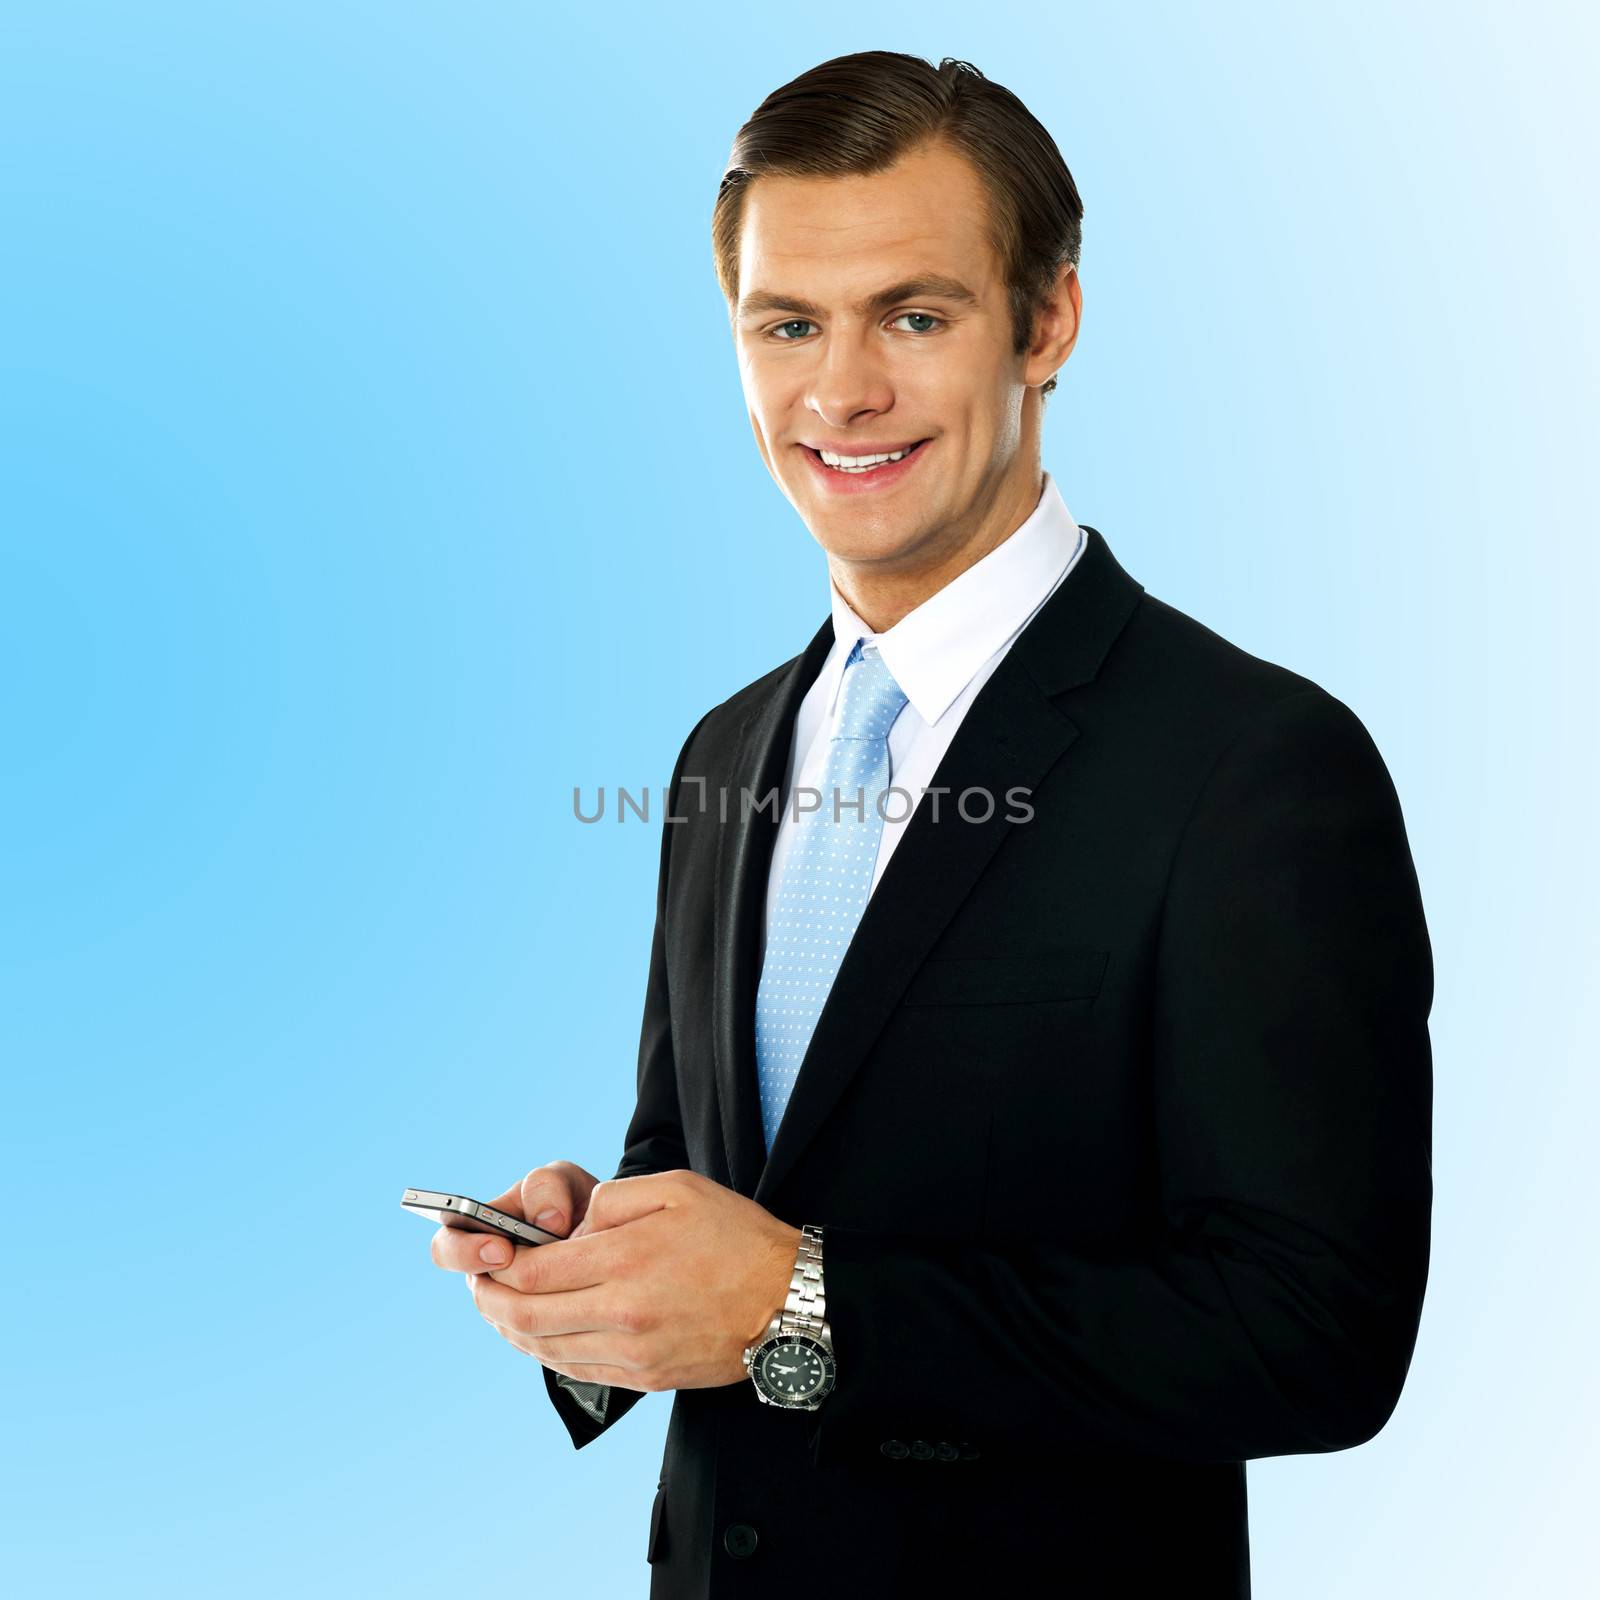 Corporate guy sending text message